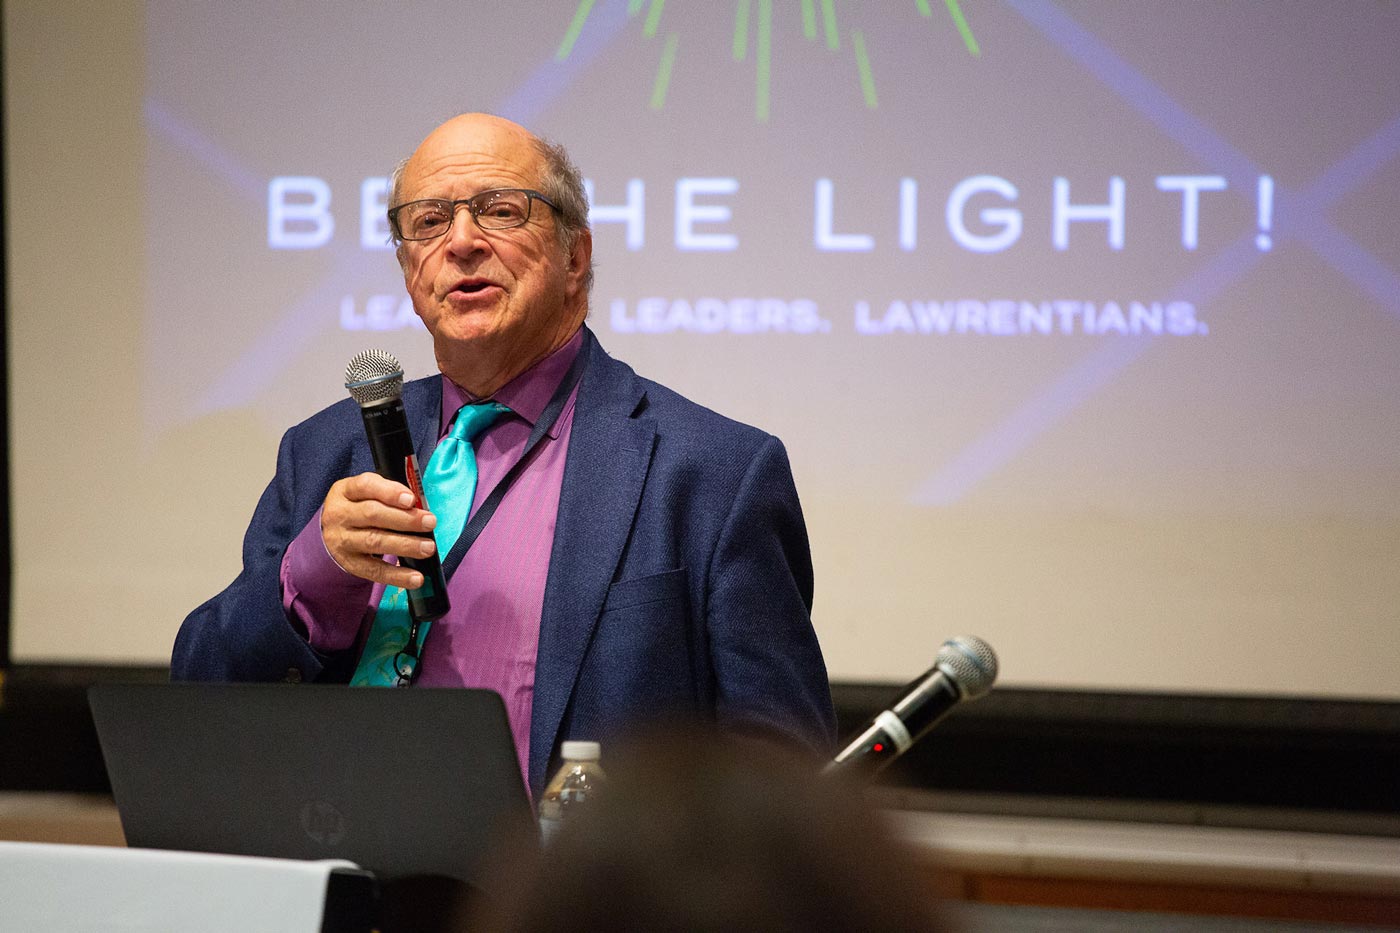 J. Thomas Hurvis ’60, speaking here during the public launch of the Be the Light! campaign